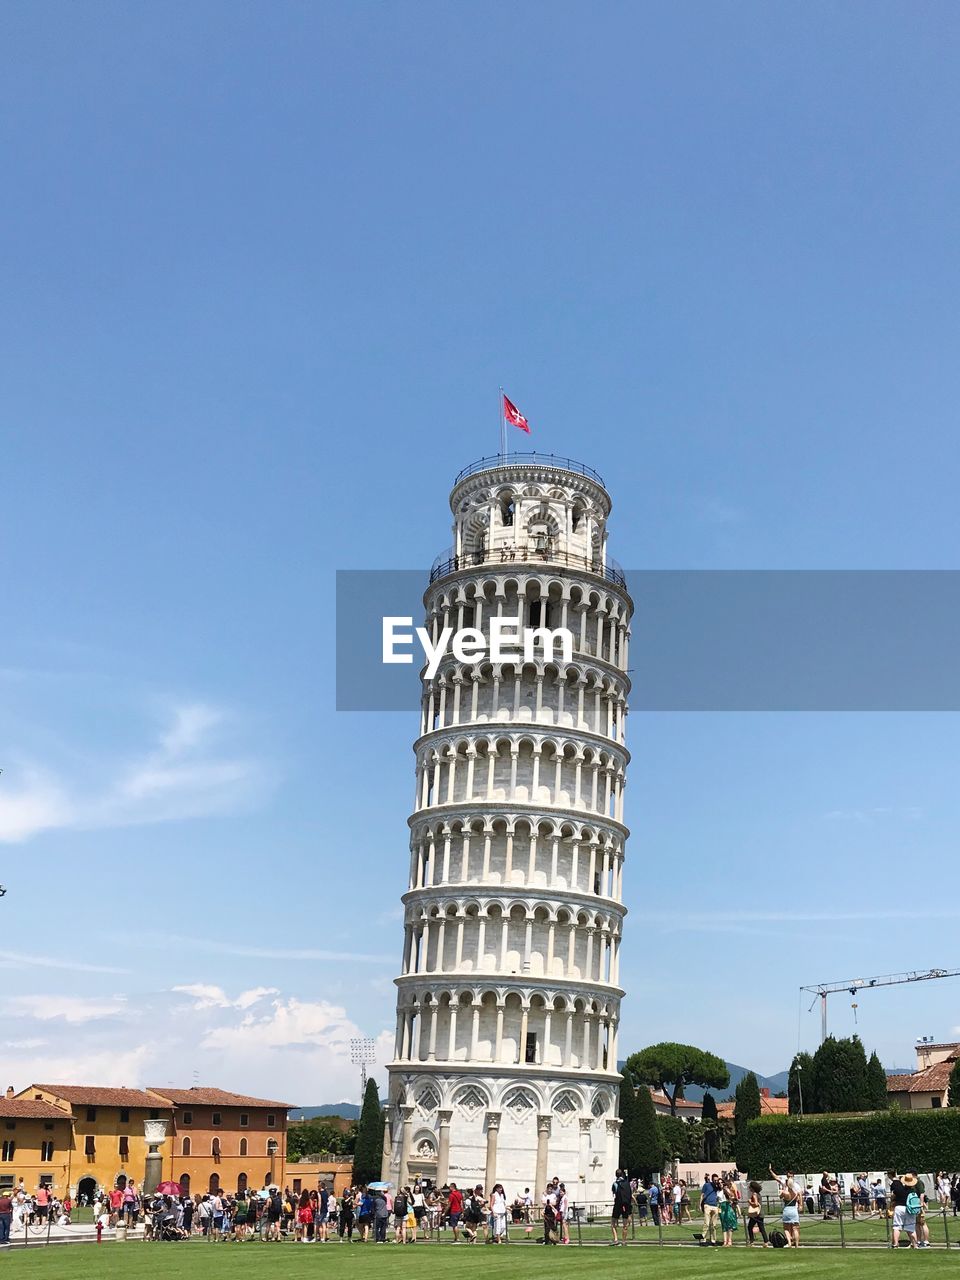 Group of people in front of leaning tower against sky